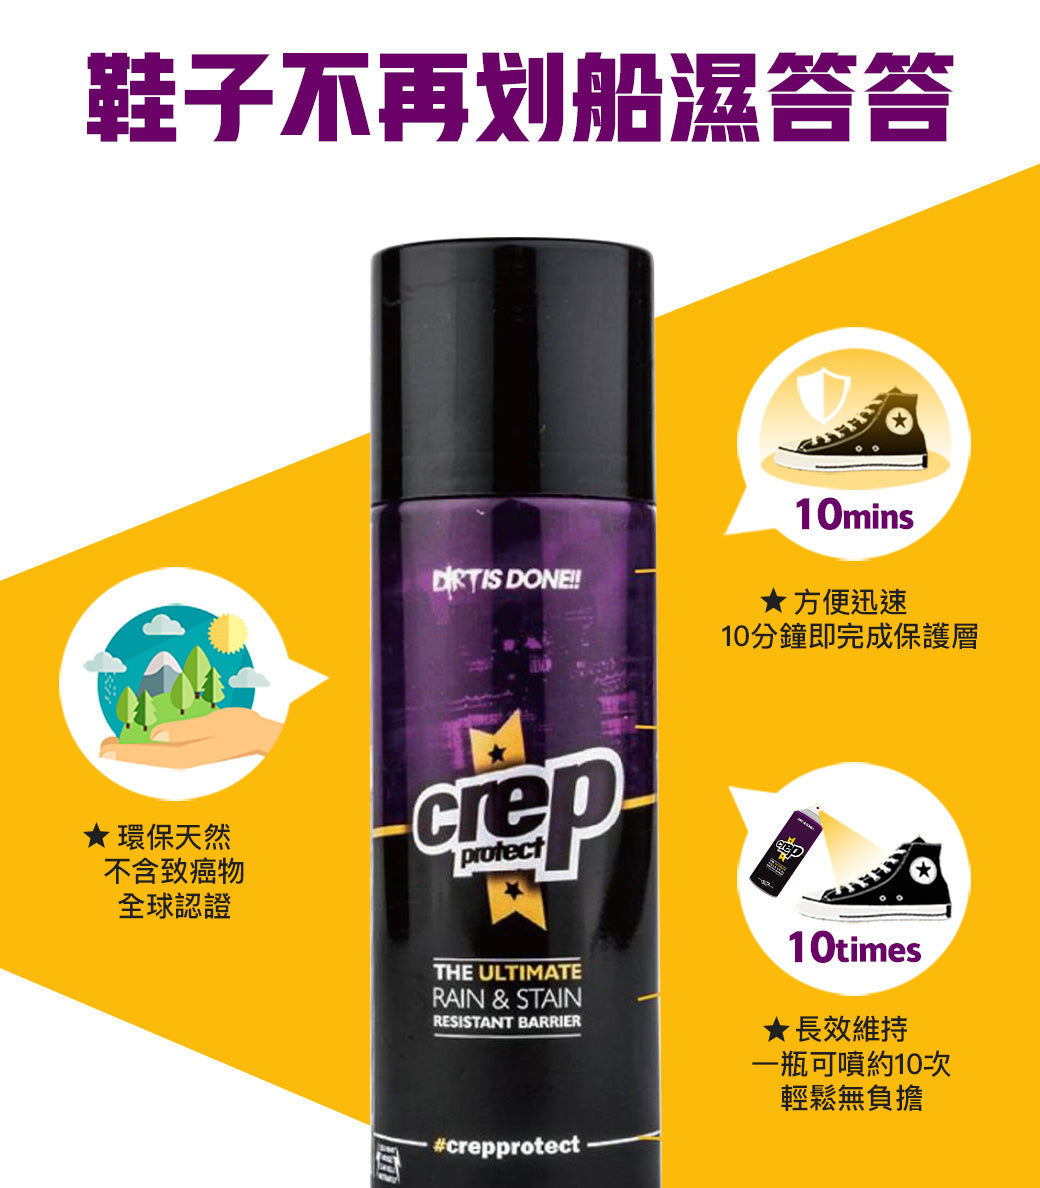 Crep Protect - 納米科技抗污防水噴霧｜200ml｜Rain and stain protection